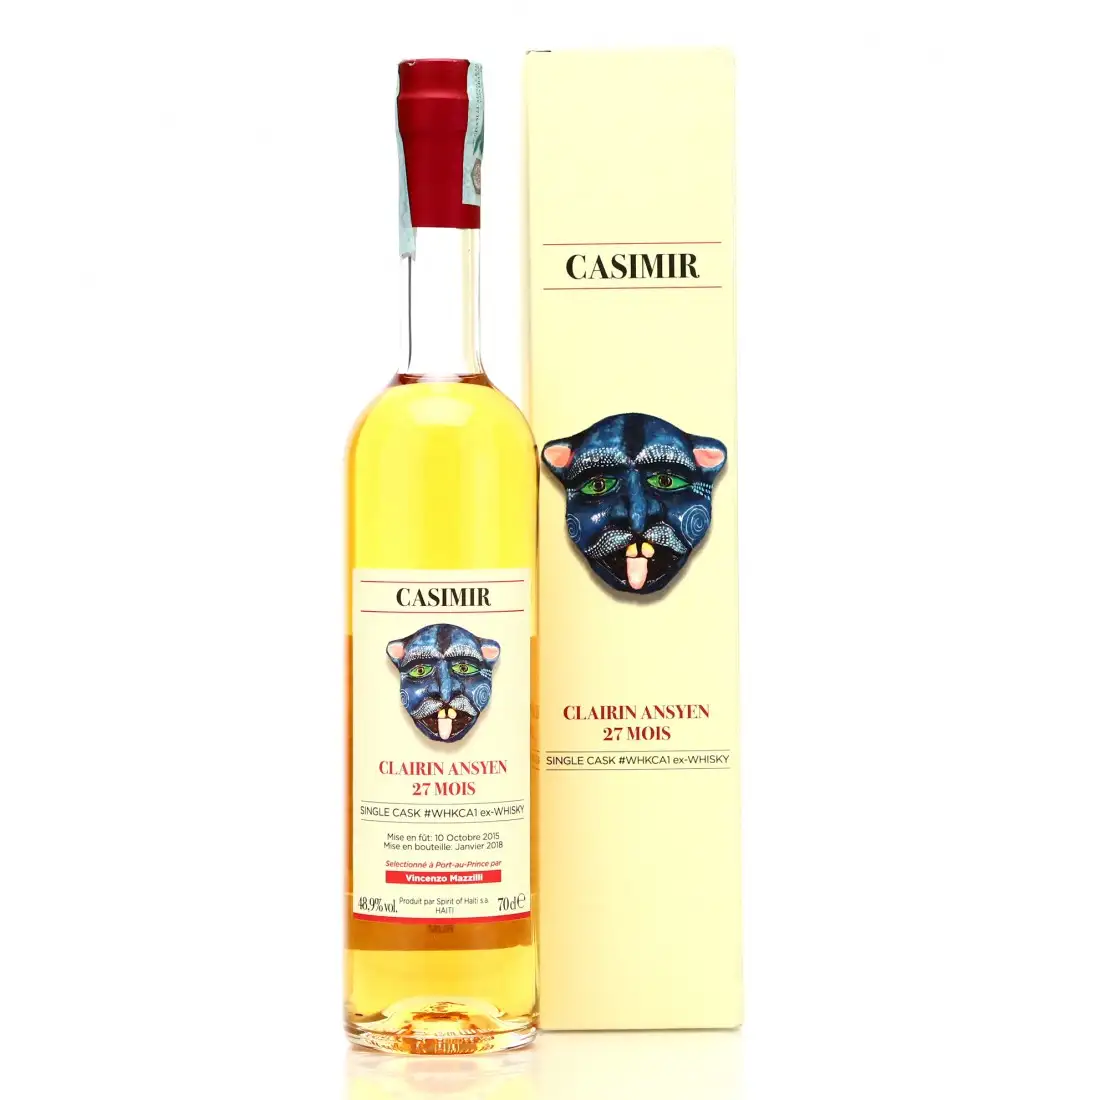 Image of the front of the bottle of the rum Clairin Ansyen Casimir (Vincenzo Mazzilli)